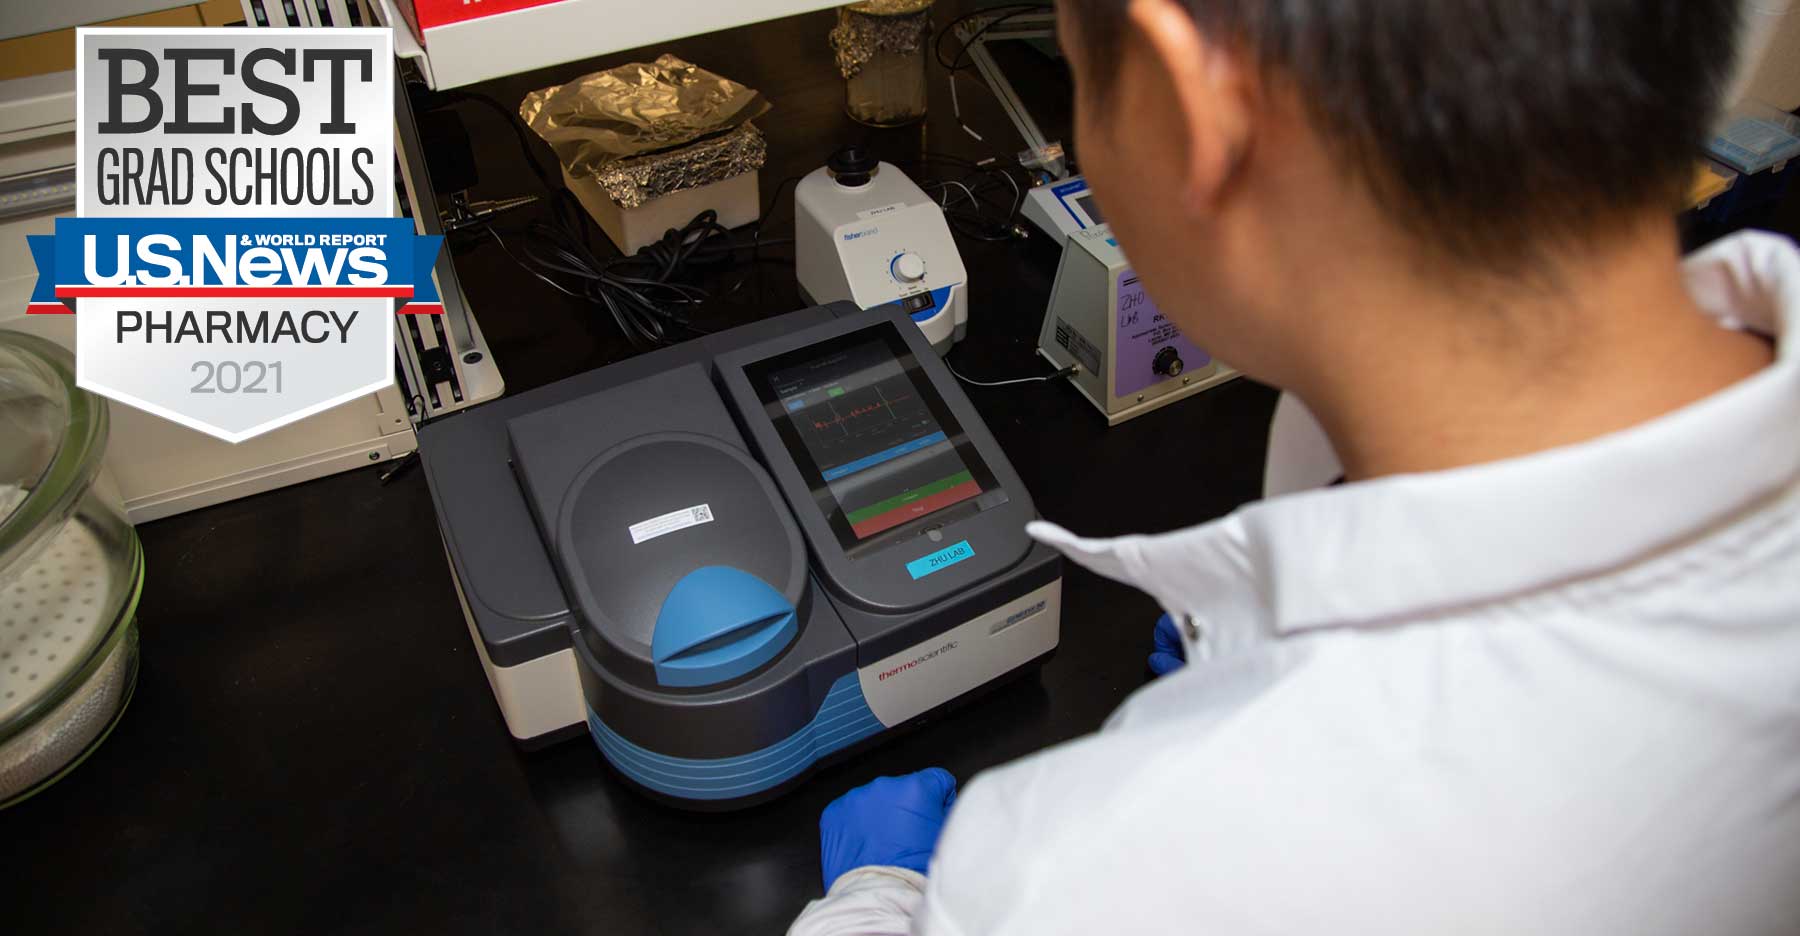 a pharmacy student using a piece of lab equipment alongside a u.s. news and world reports banner ranking v.c.u. school of pharmacy as a best grad school for 2021